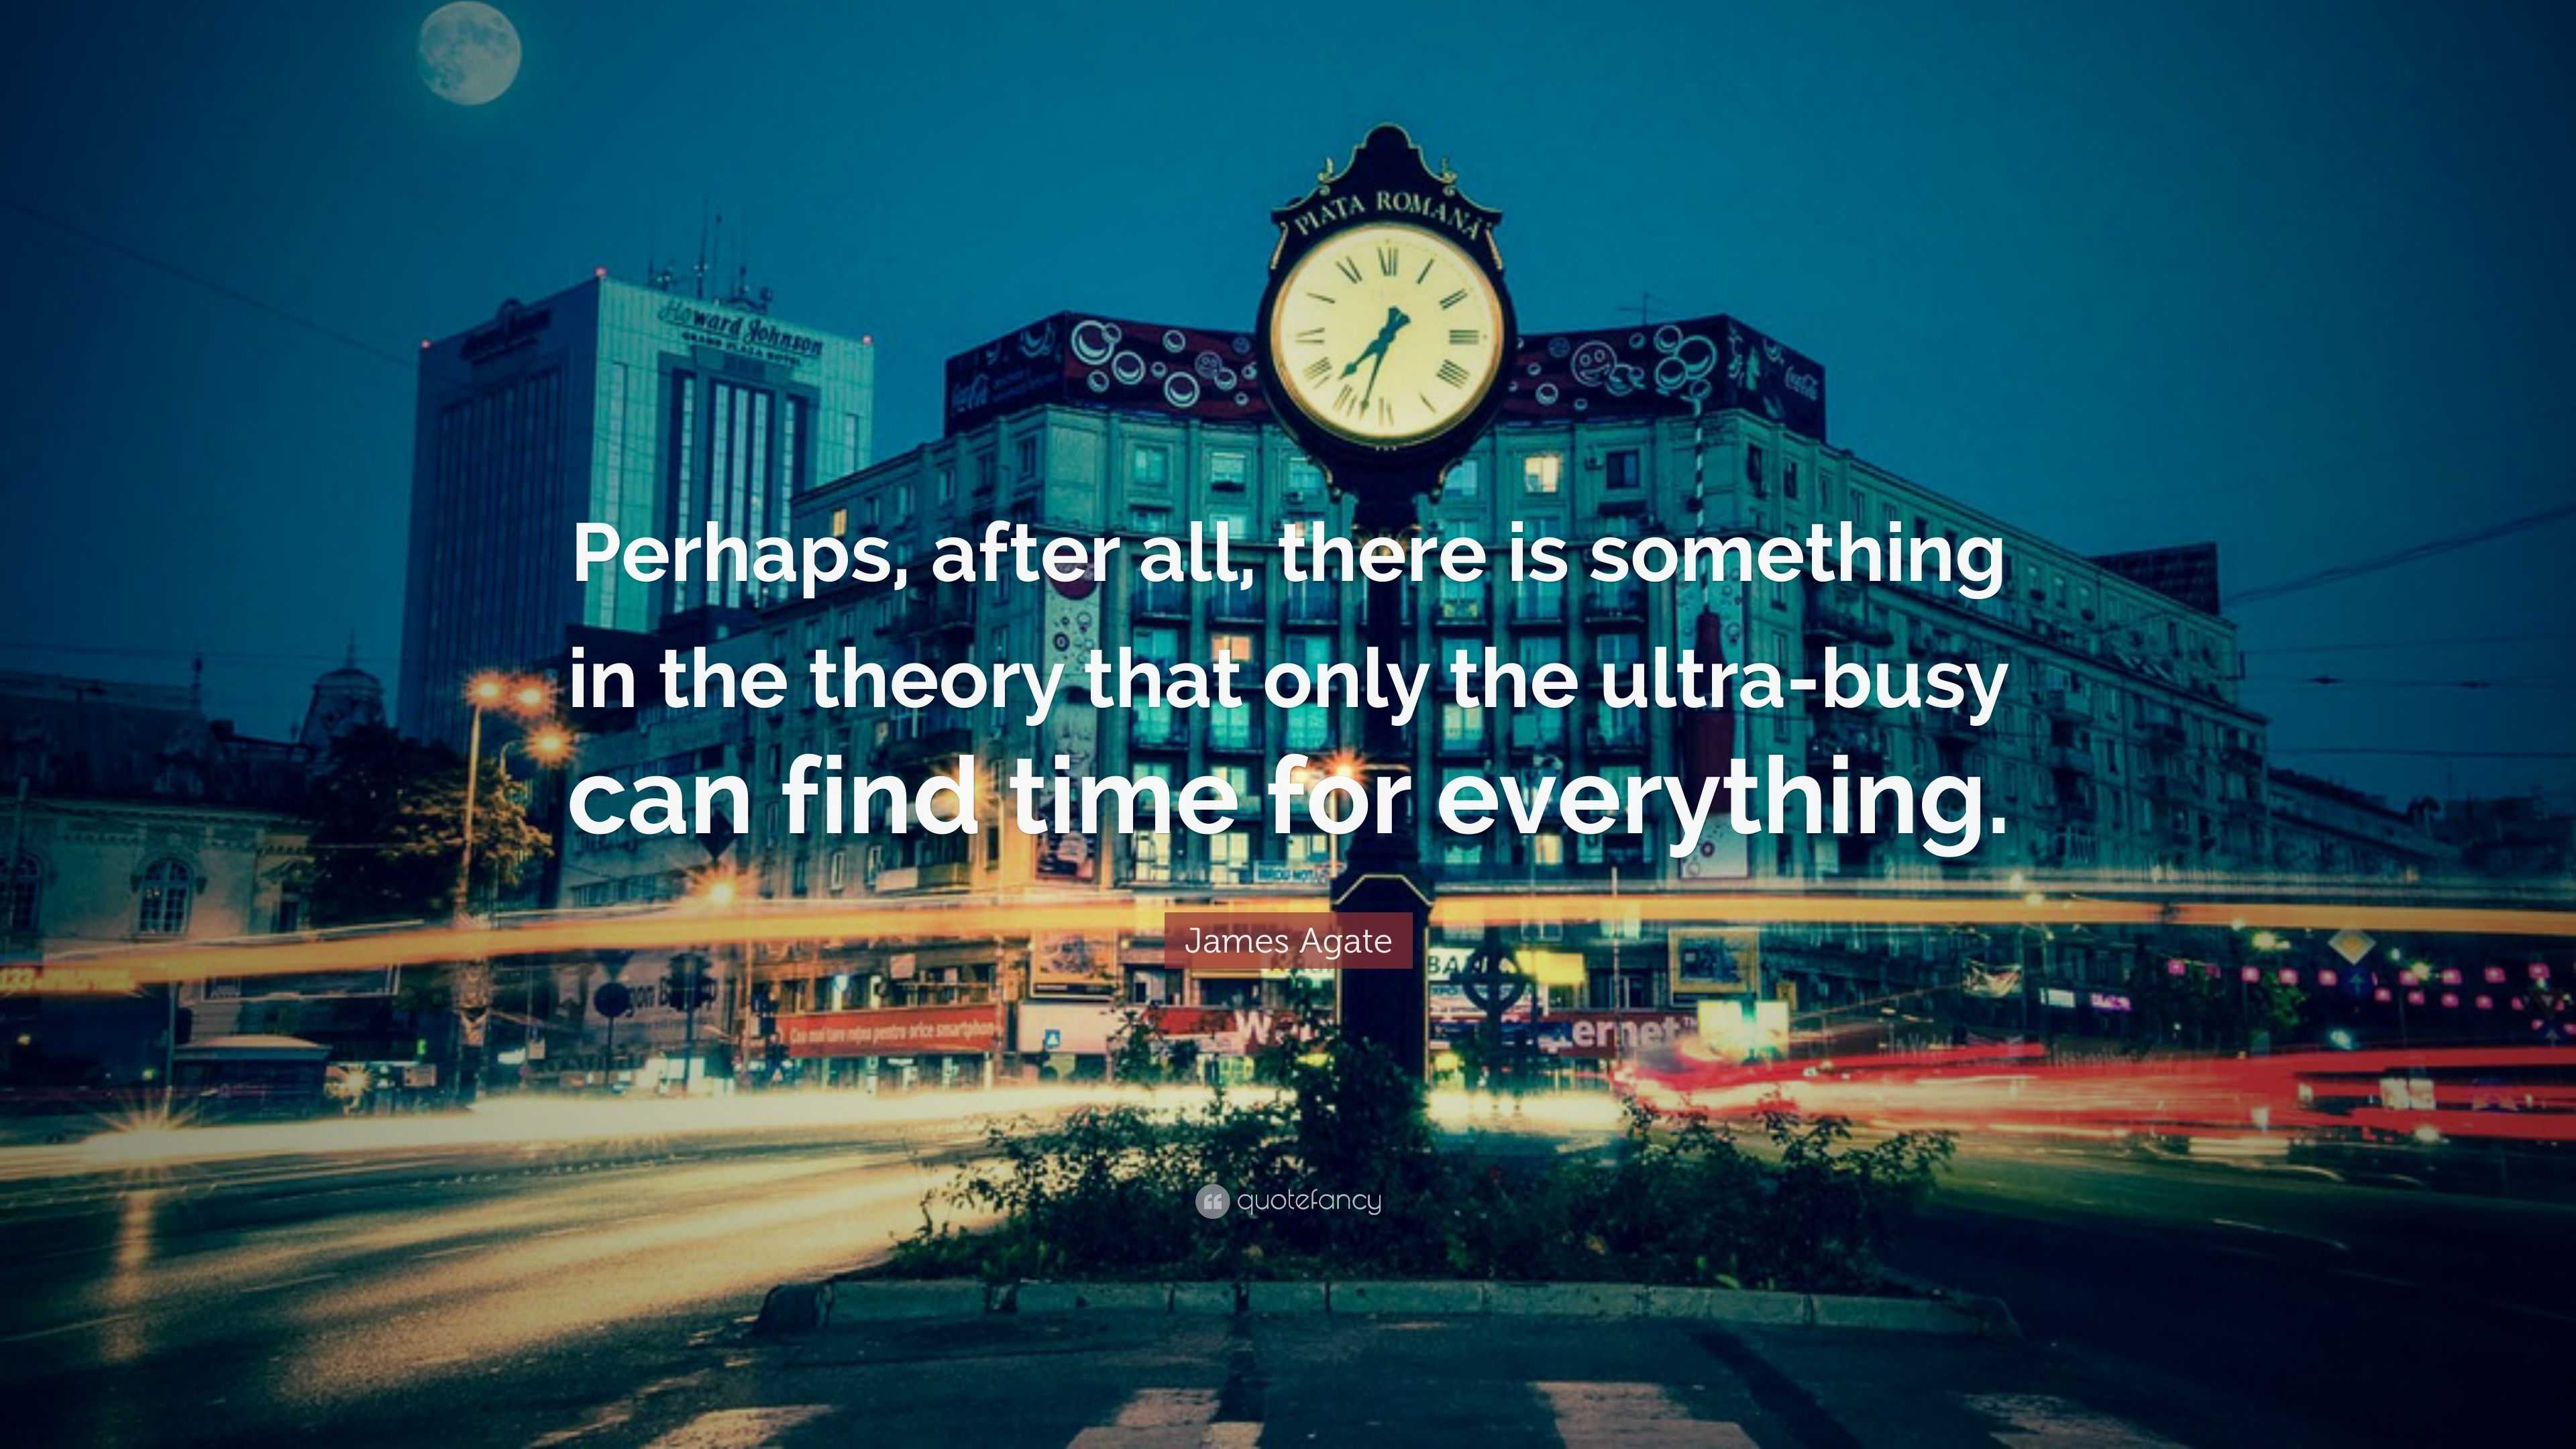 James Agate Quote: “Perhaps, after all, there is something in the ...